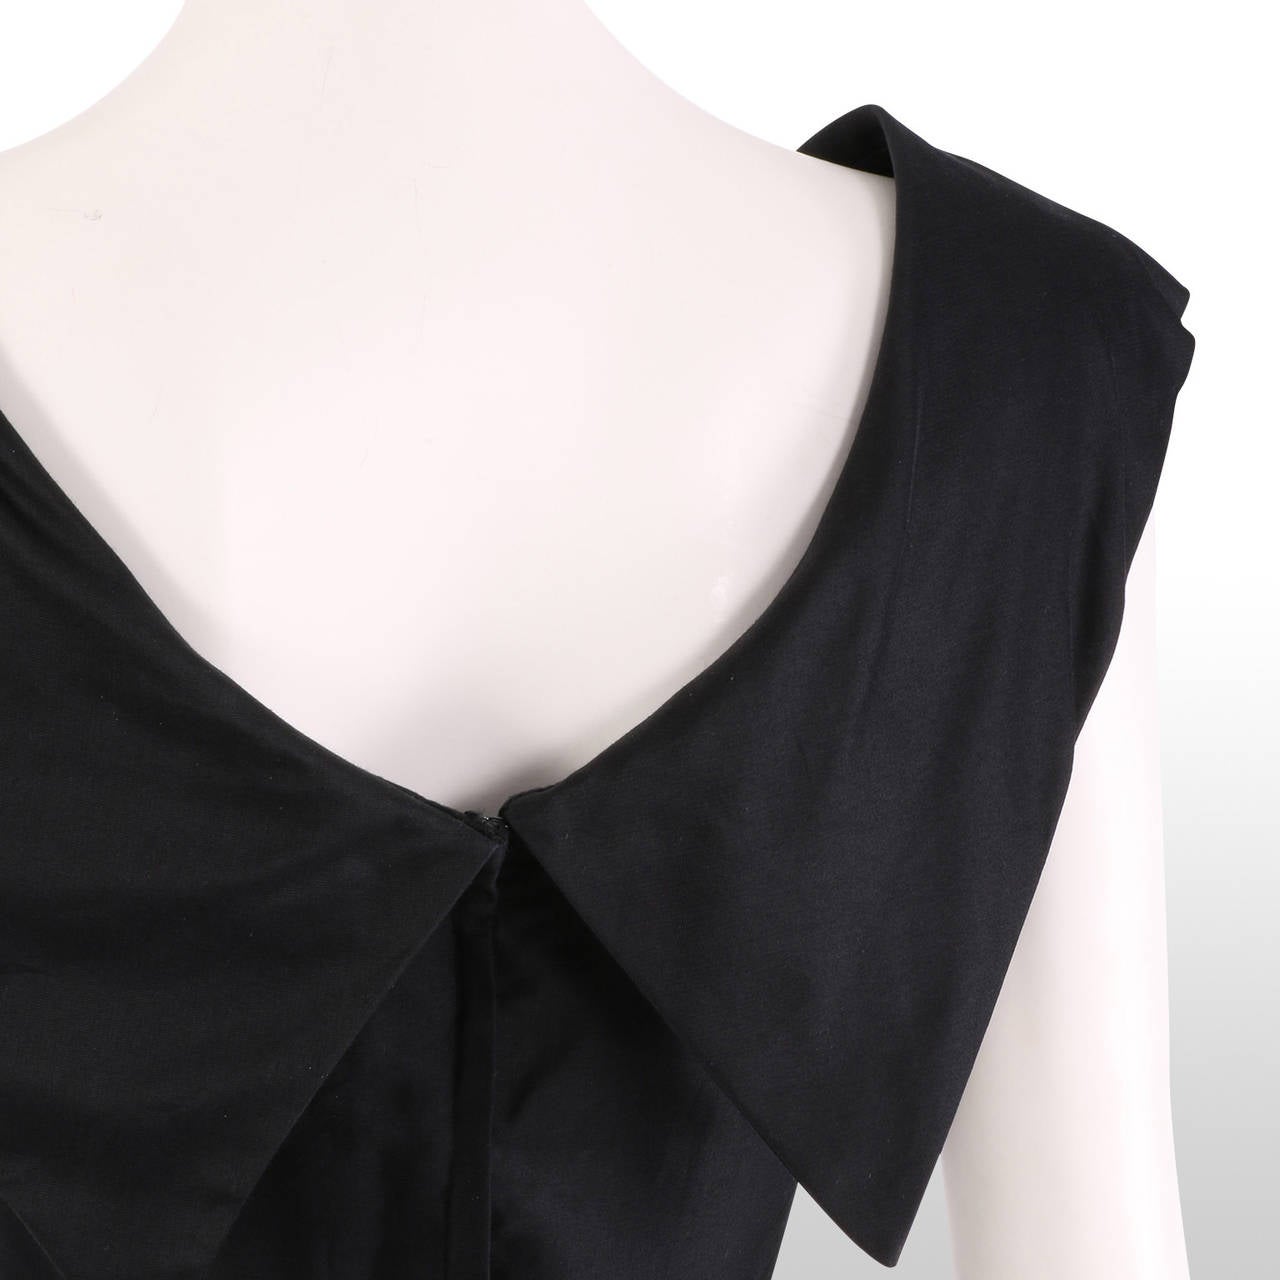 1950's Black Sweetheart Neck With Chiffon Detail Cocktail Dress 4